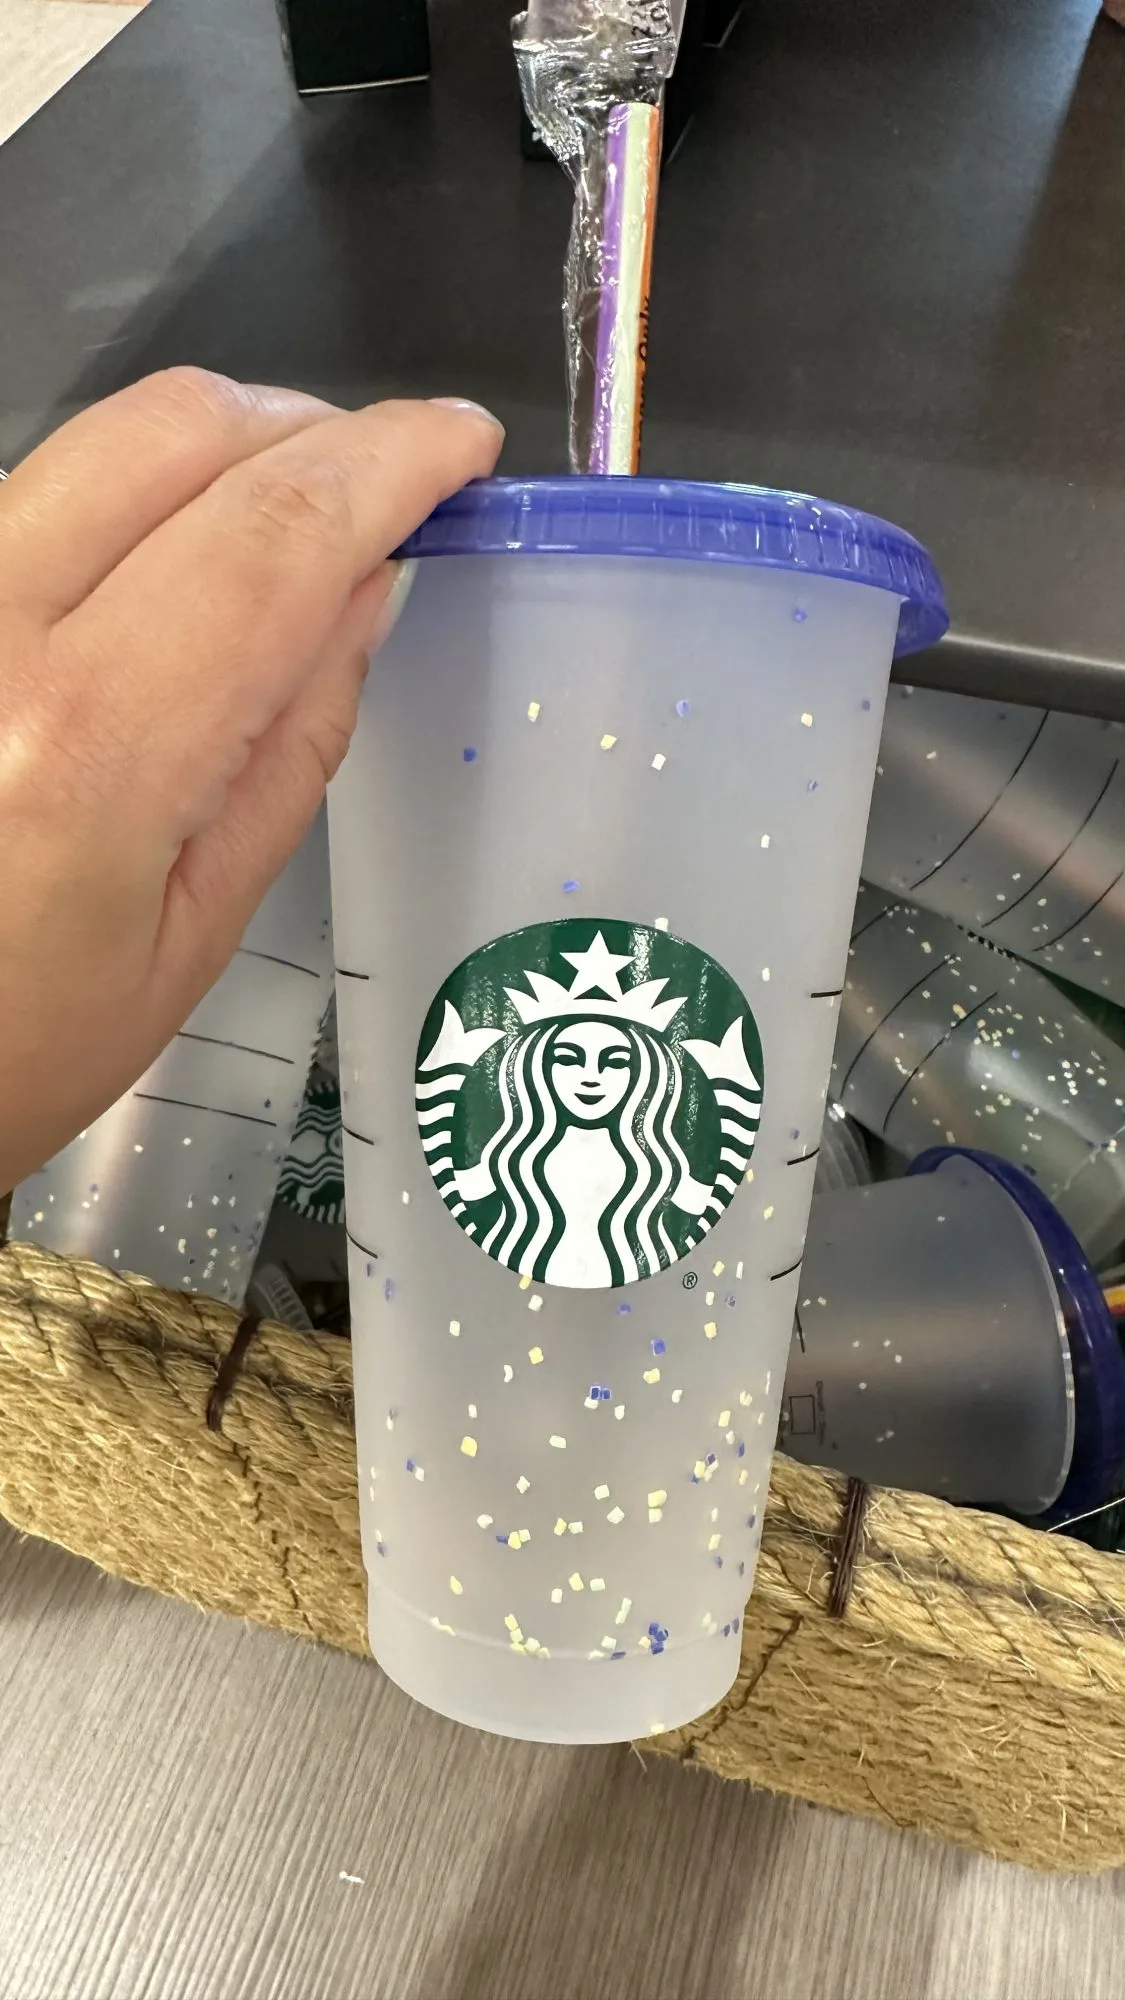 Starbucks Is Selling A $3 Color Changing Hot Cup For Christmas and